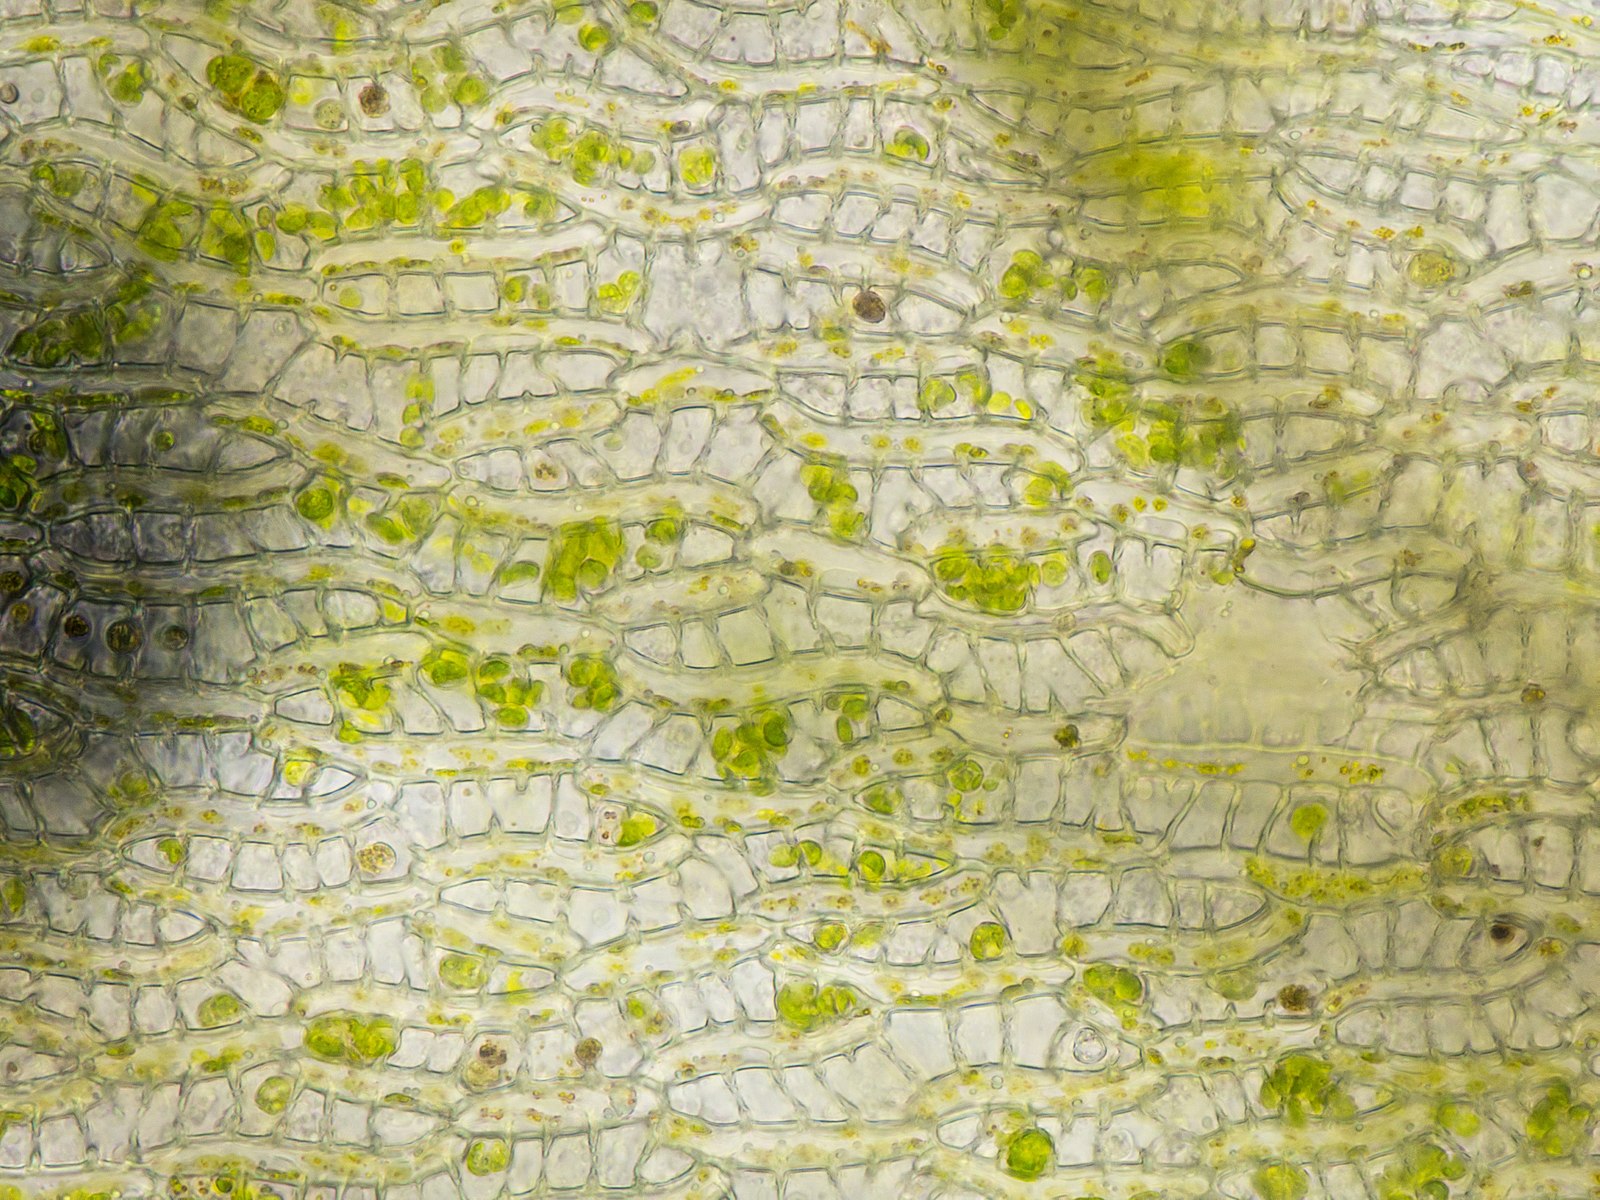 Microscopic view of Sphagnum leaf cells reveals that they are mostly empty. Some large green cells can be seen within the leaf cells.